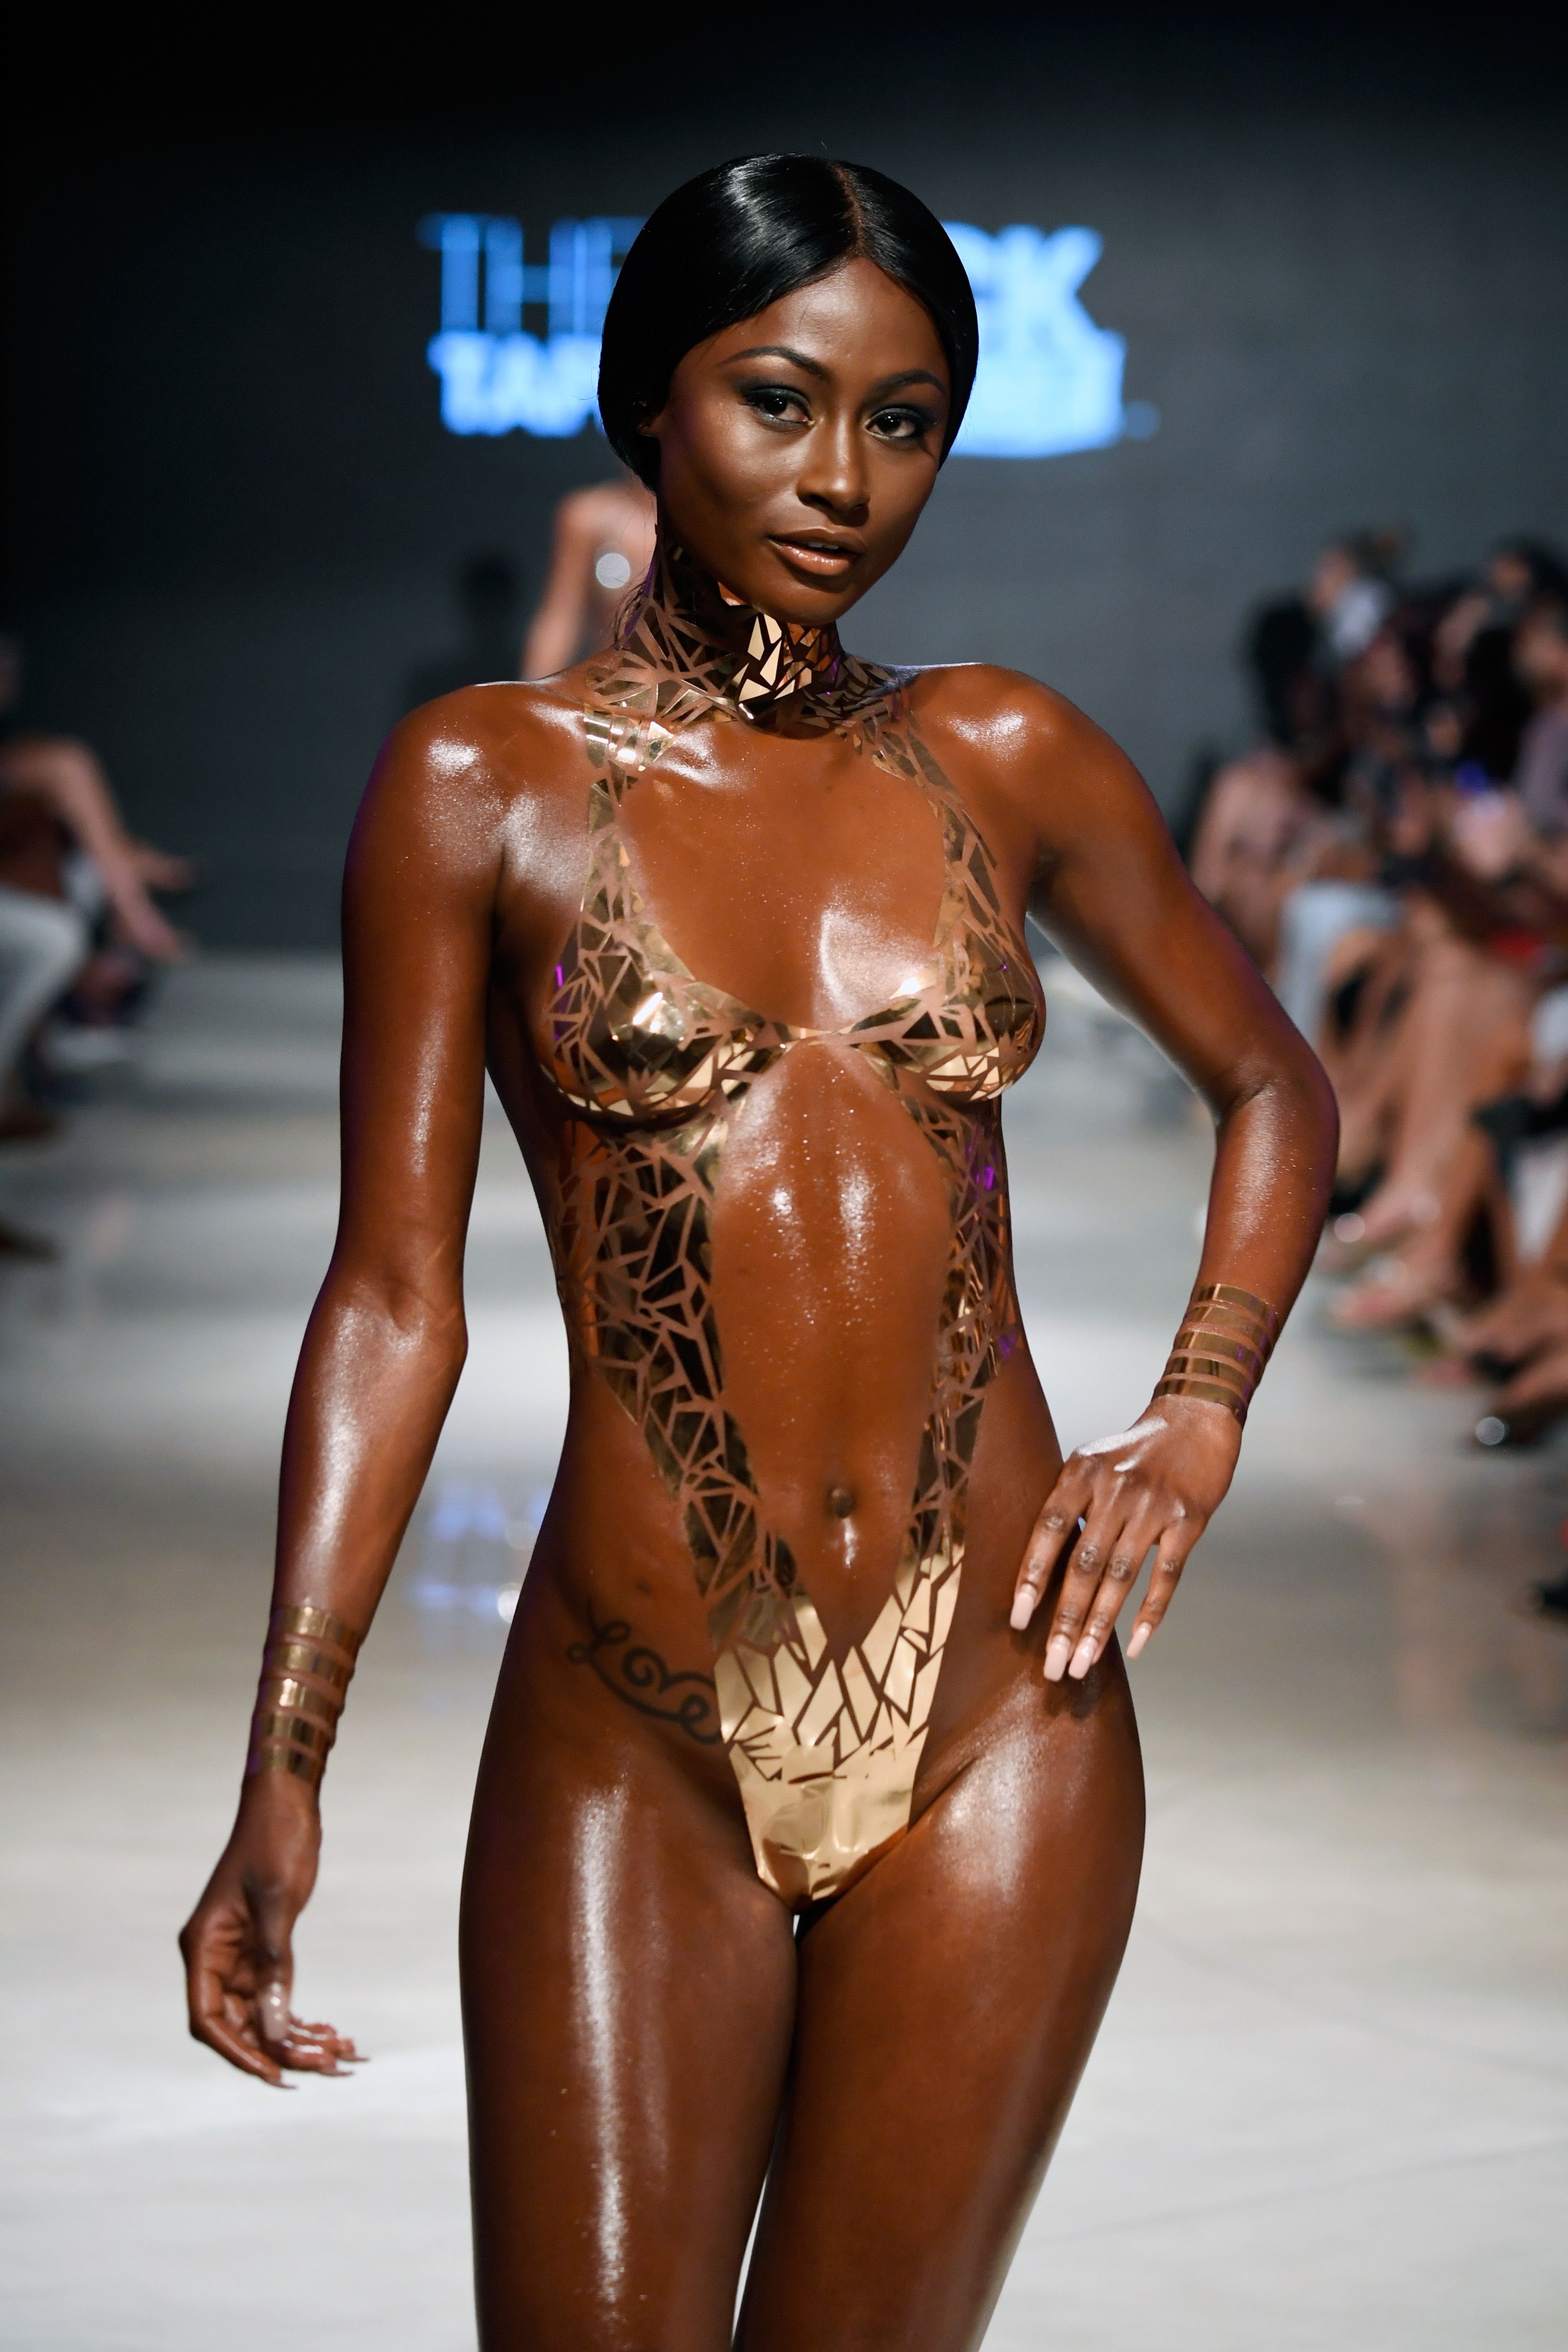 Ebony Fashion Nude - Nearly Naked Metallic Tape Swimsuits Exist - All About the Black Tape  Project Maimi Swim Week Show